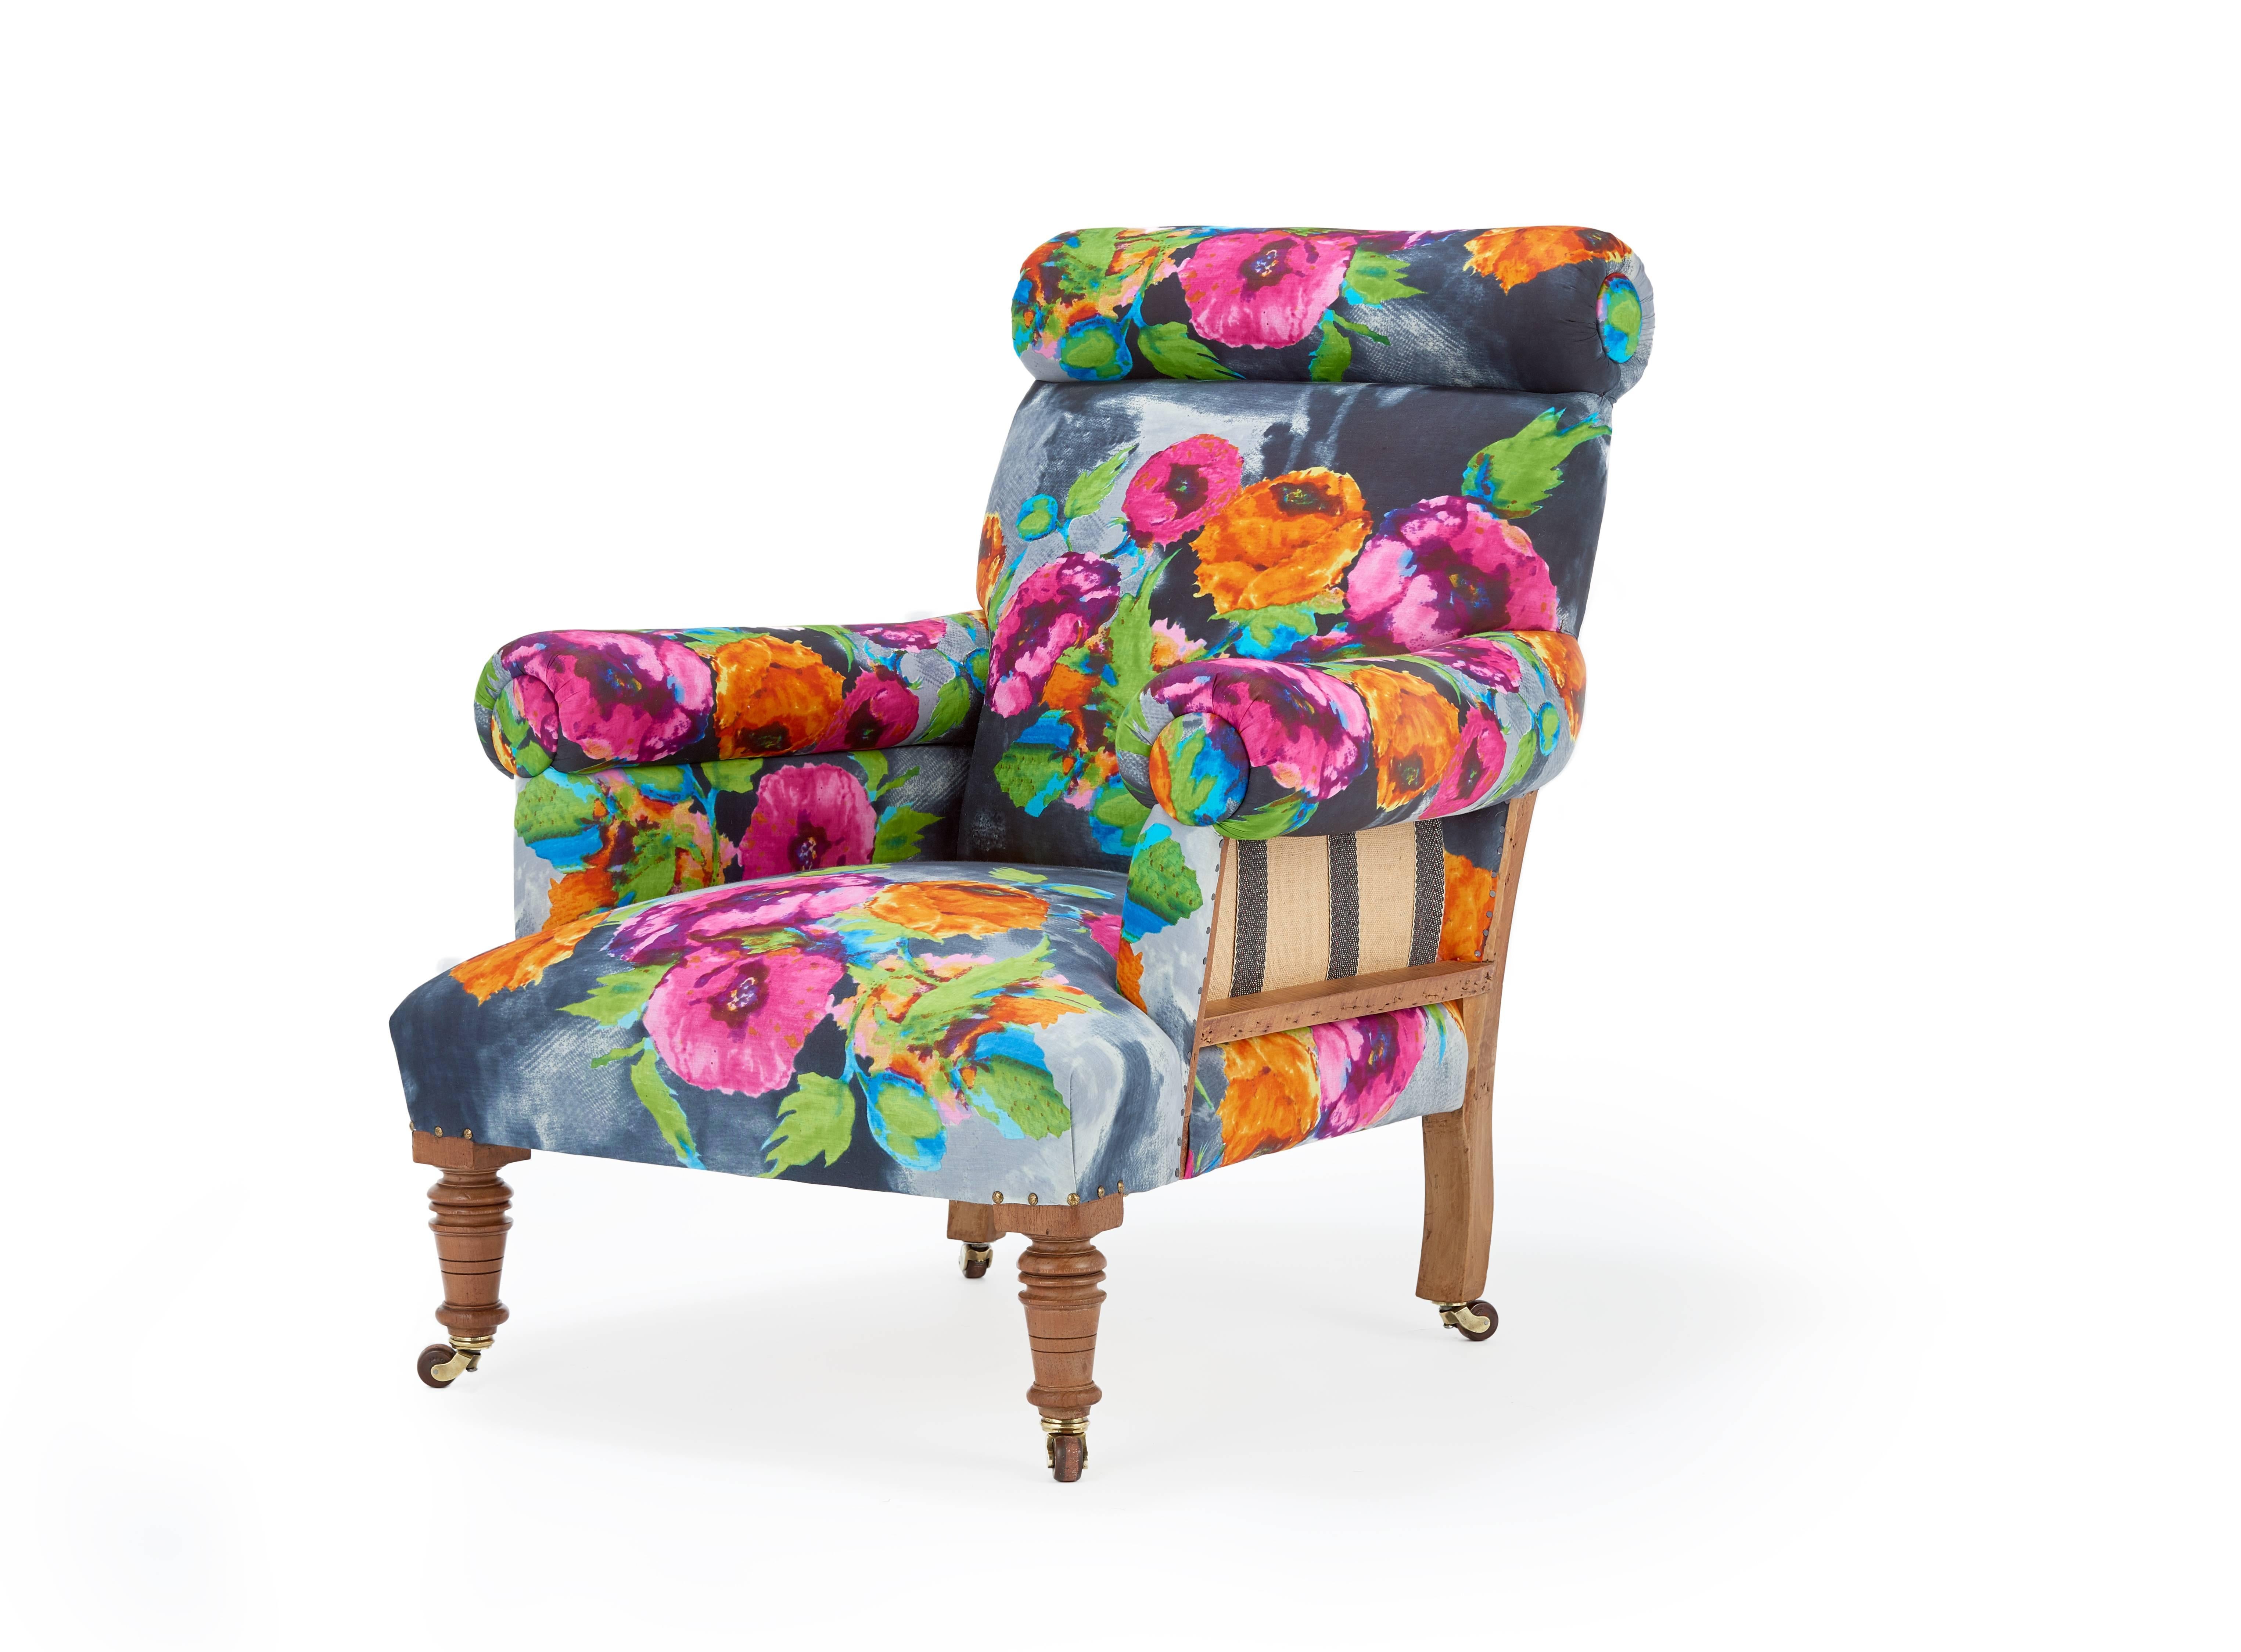 A truly stunning and unique antique Victorian Country House armchair with exposed frame and springs to reveal the history of the piece and the art of upholstery, aptly named as 'The Black Rose'.

Beautifully executed by our traditionally trained